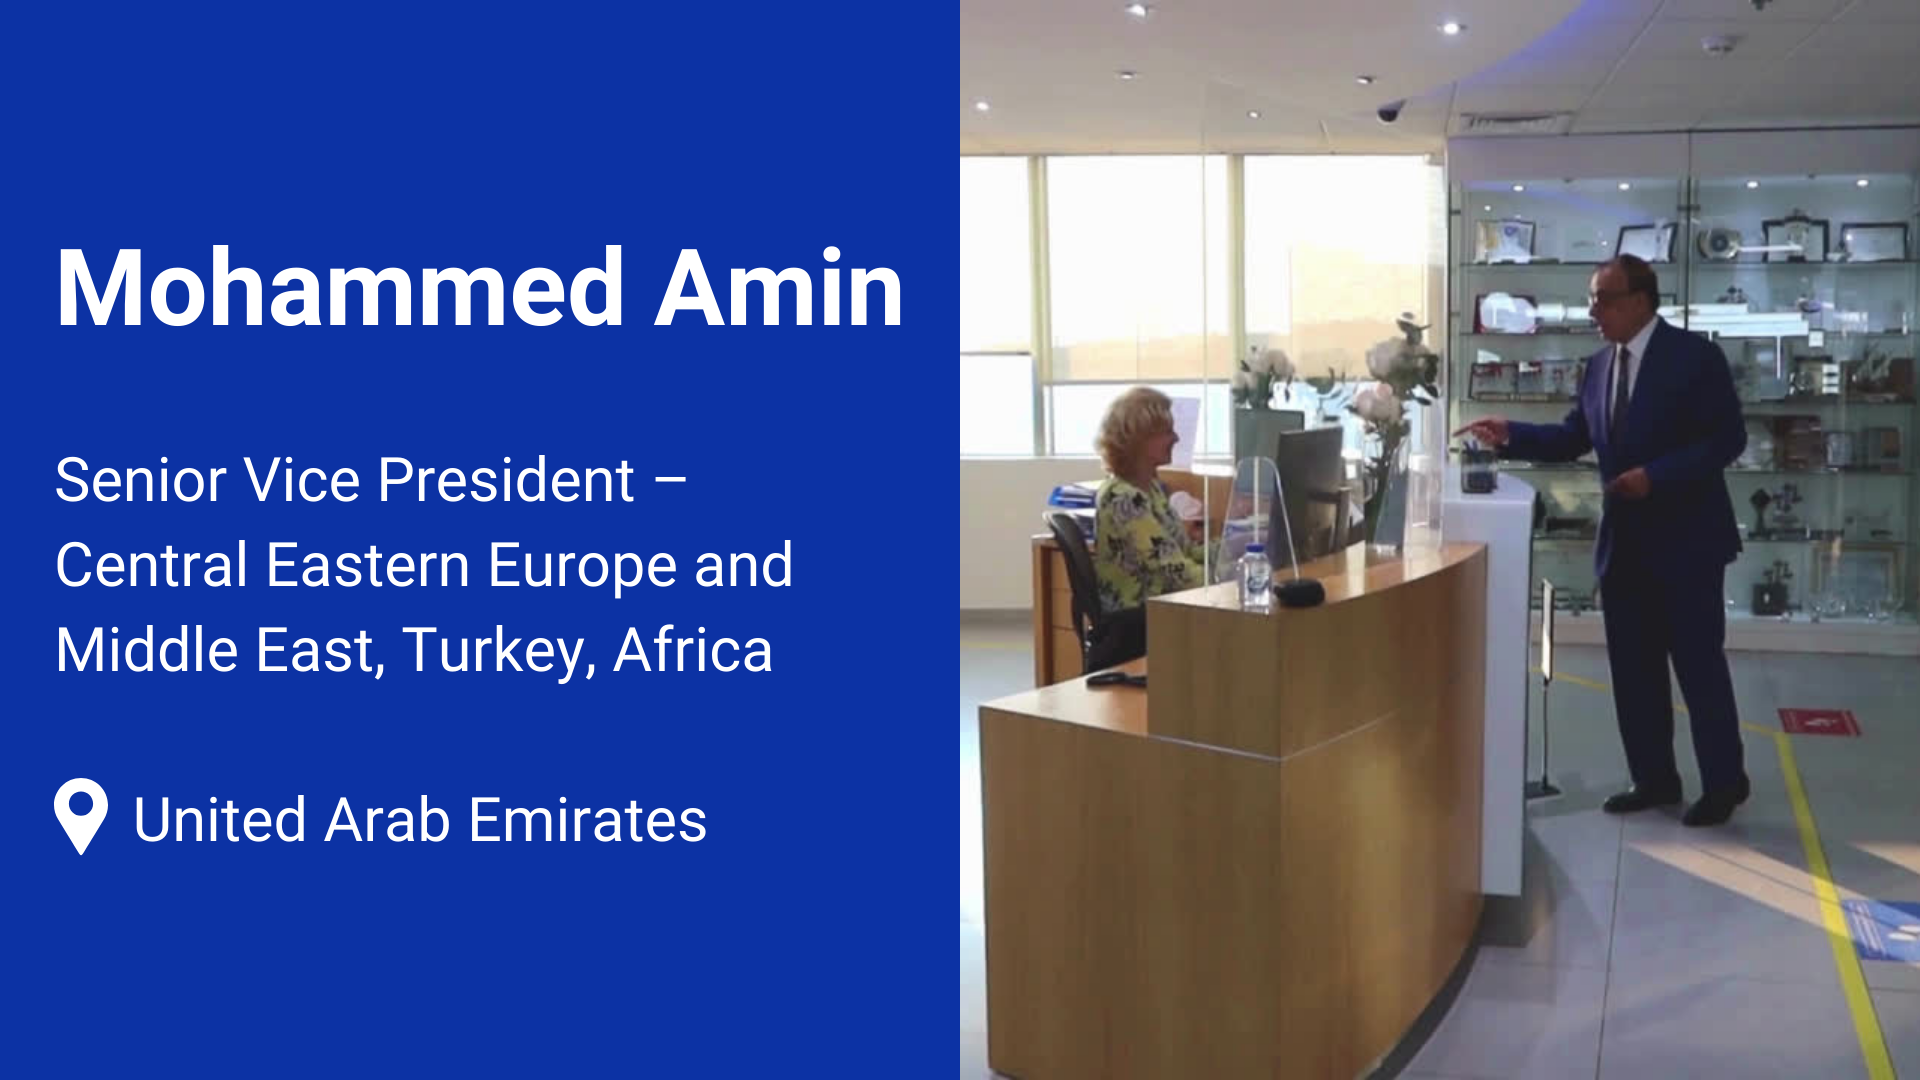 Mohammed Amin. Senior Vice President Sales. Central Eastern Europe and Middle East, Turkey and Africa. United Arab Emirates